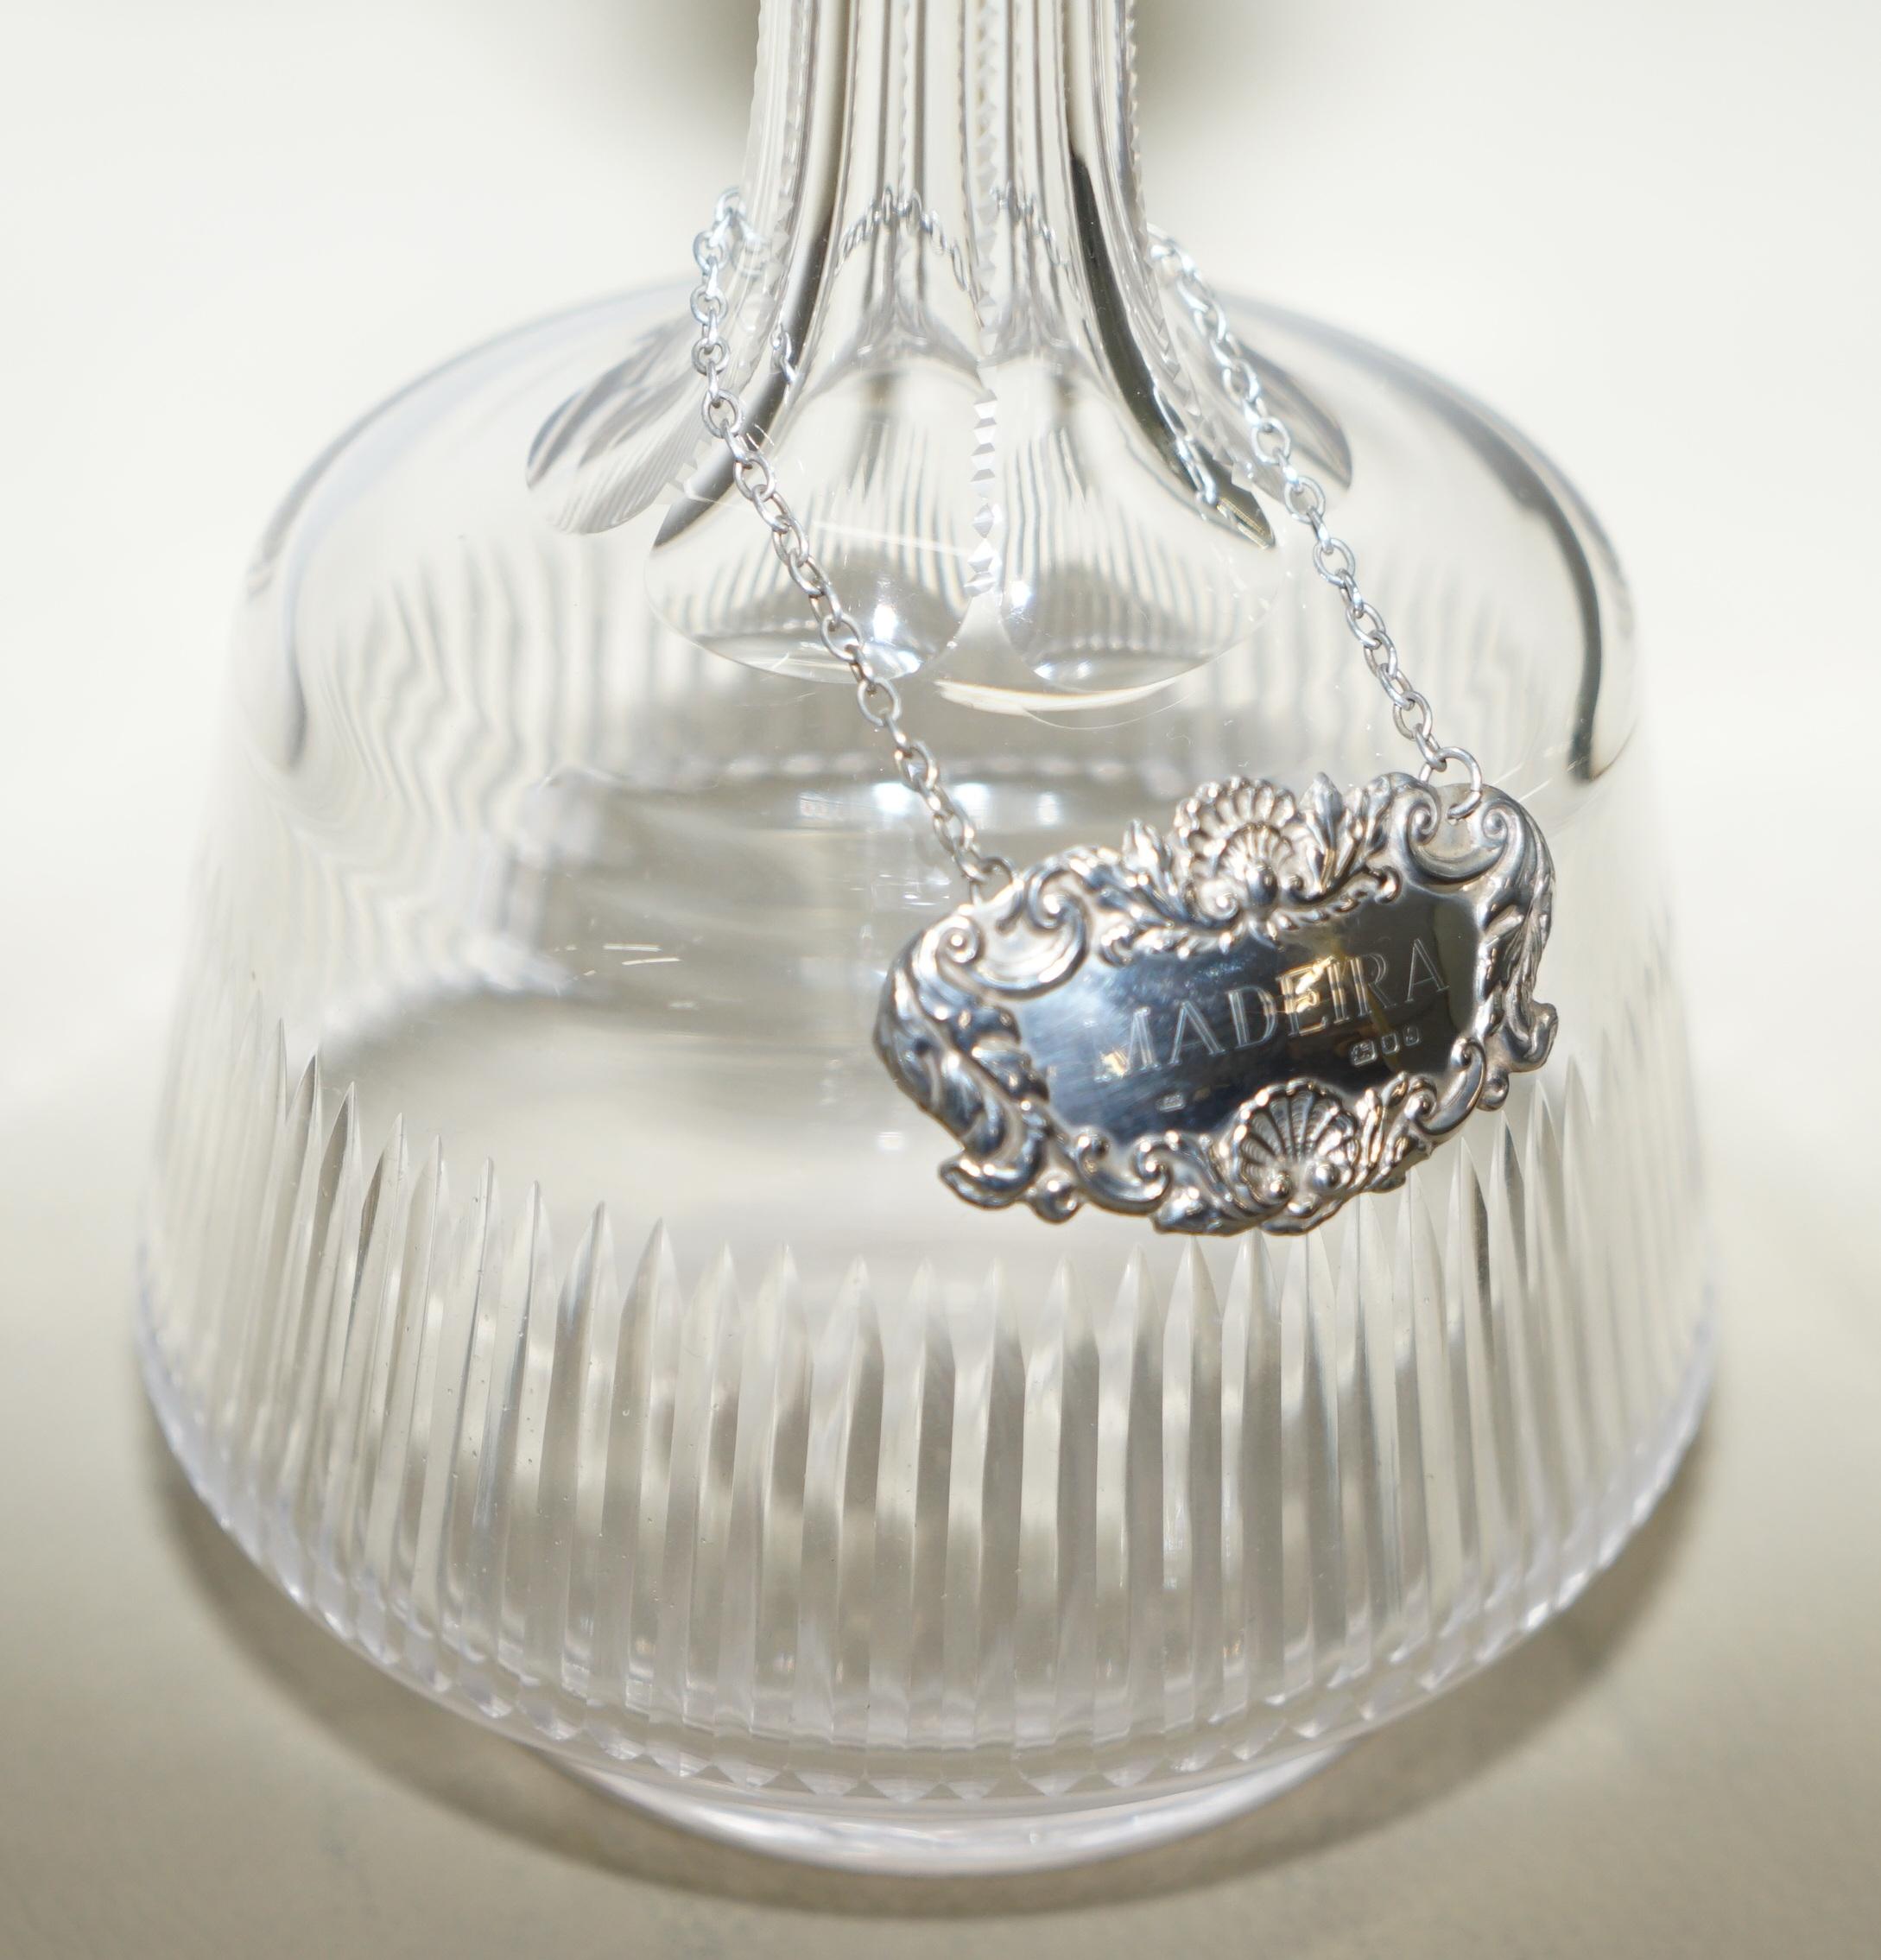 English Sweet Antique Cut Glass Crystal Decanter Jug Maderia Sterling Hanging Label 1973 For Sale